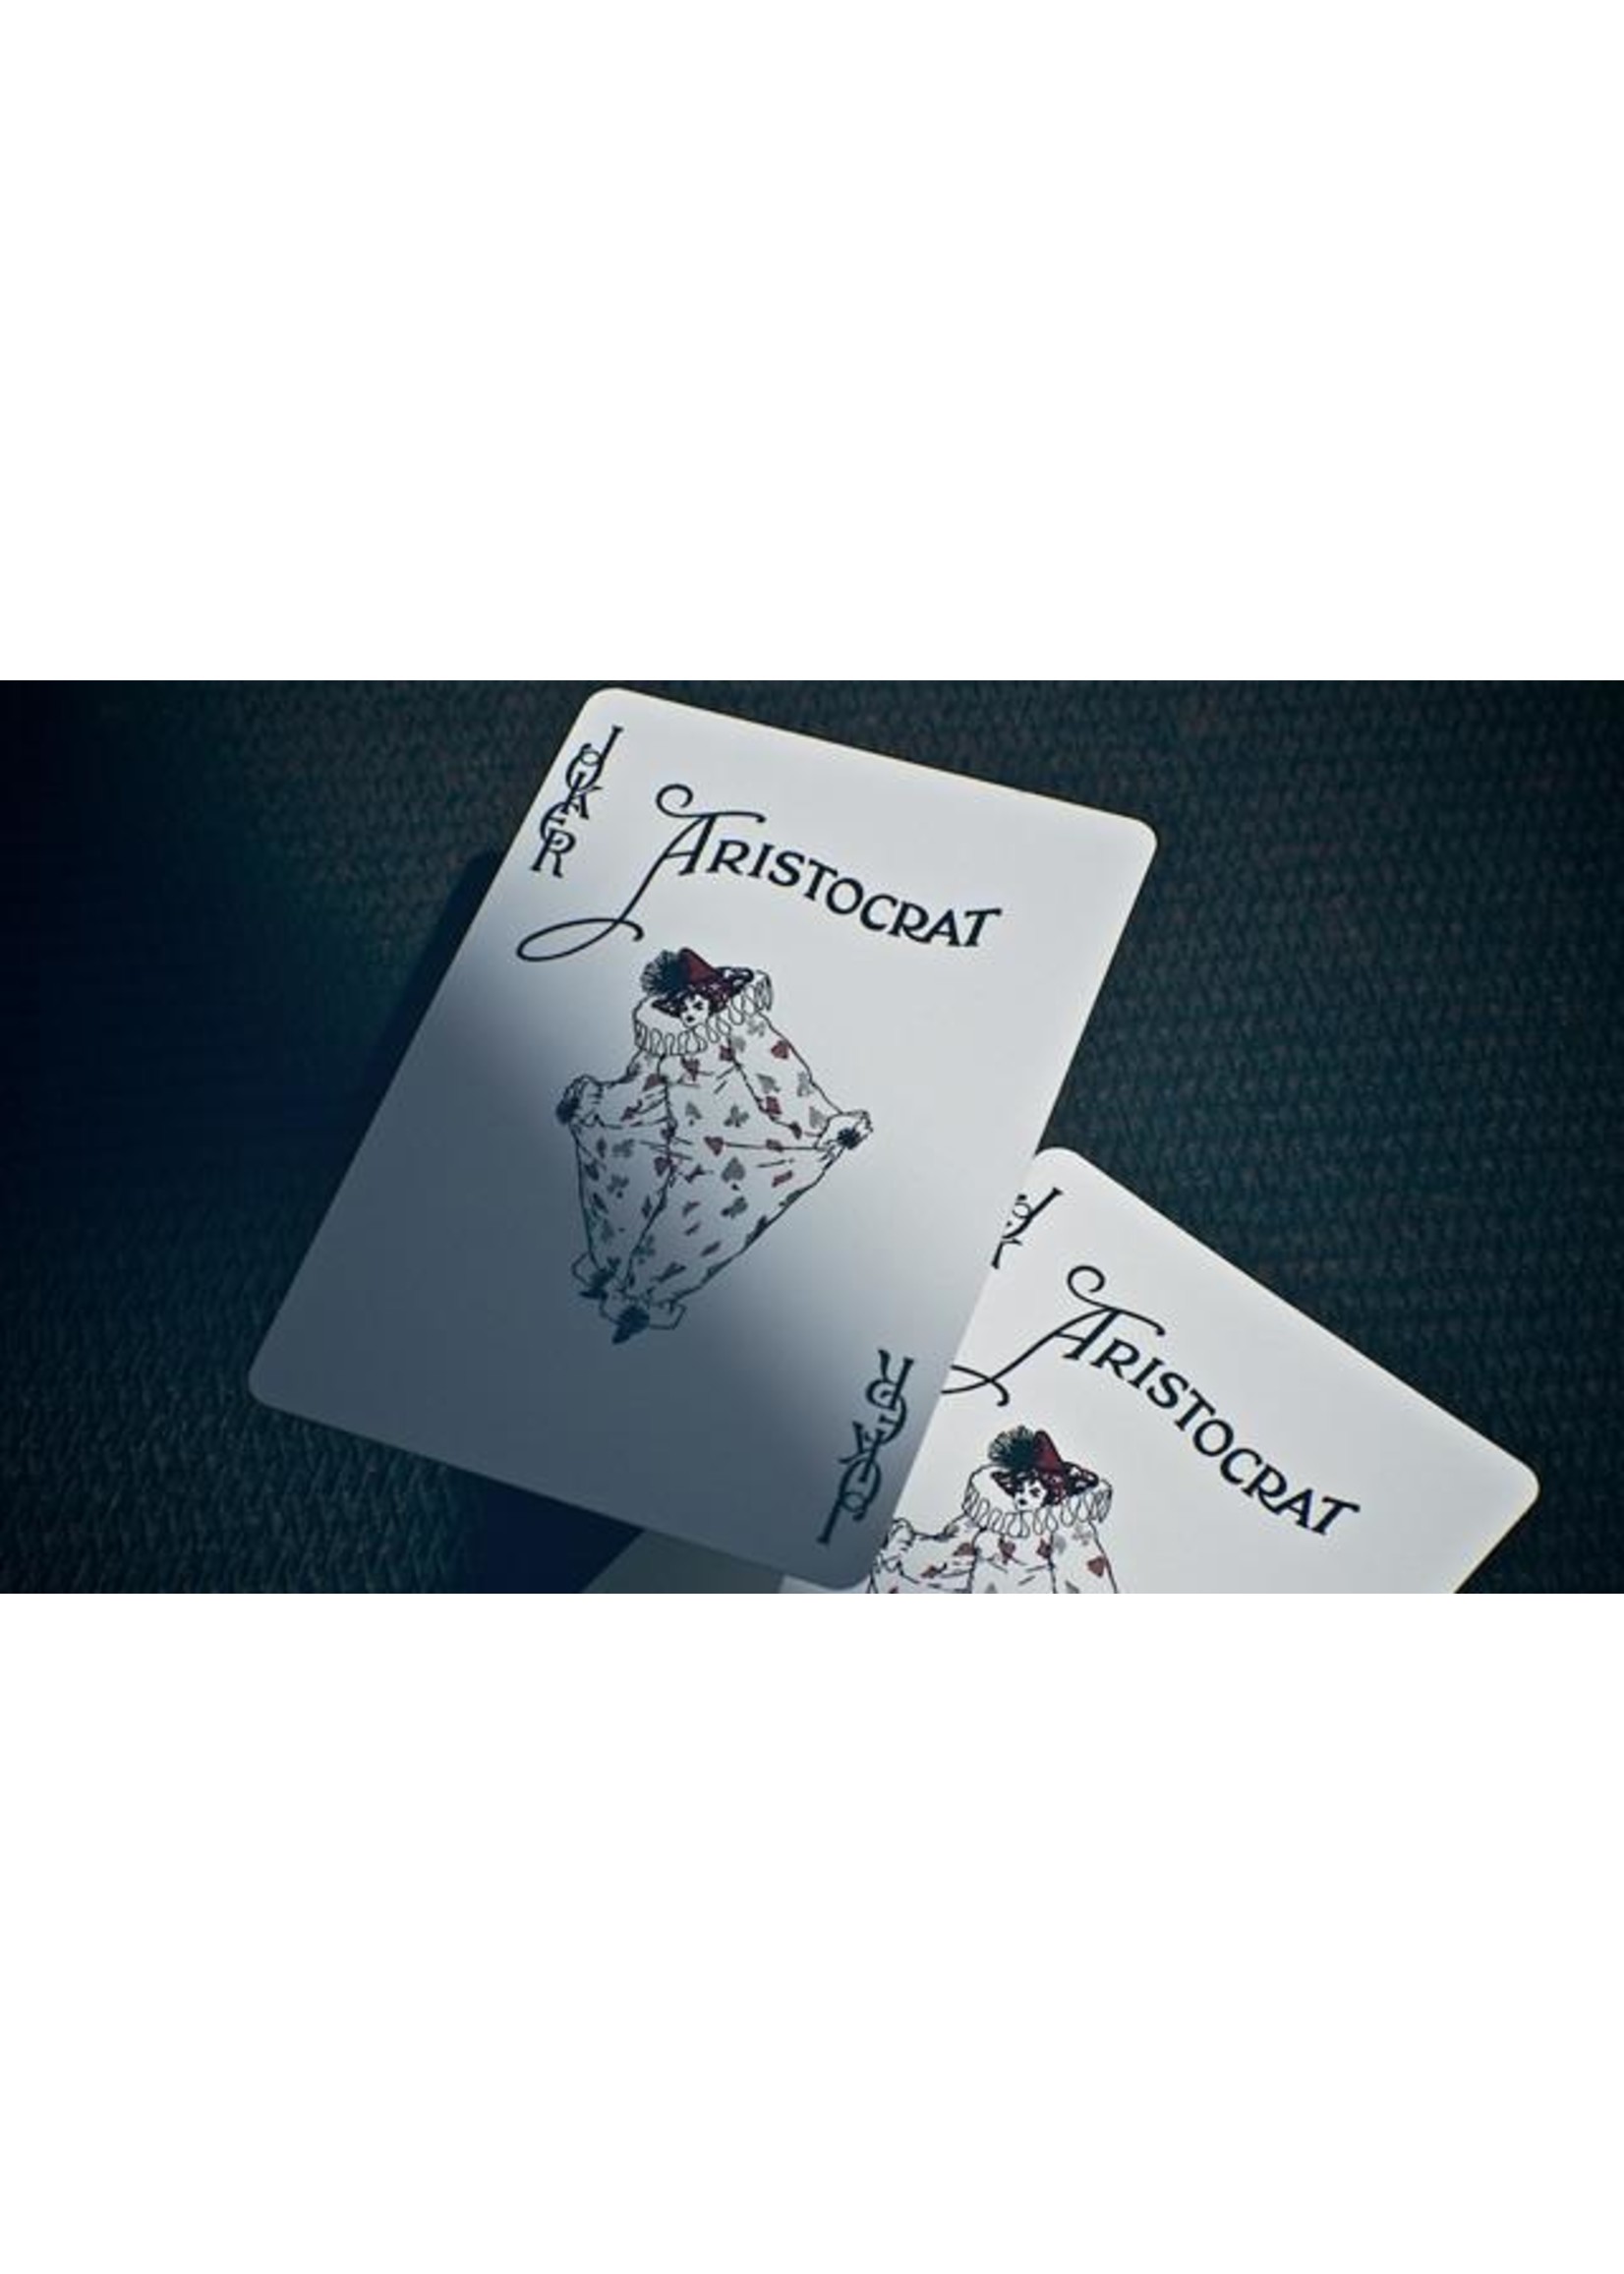 Theory11 Theory11: Aristocrats Red Playing Cards